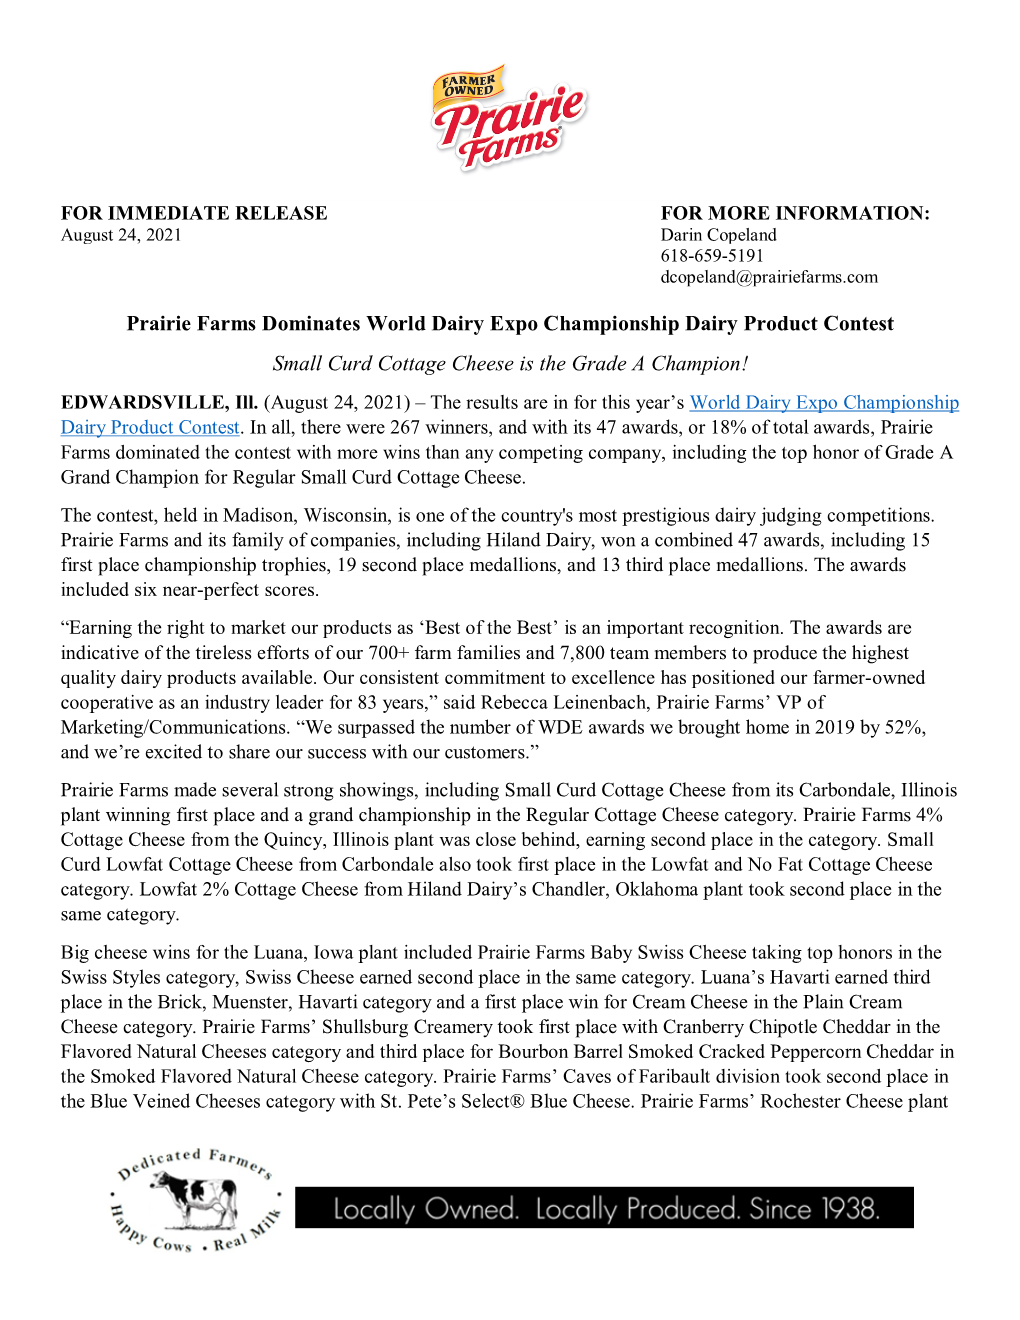 Prairie Farms Wins 47 Awards at the 2021 World Dairy Expo